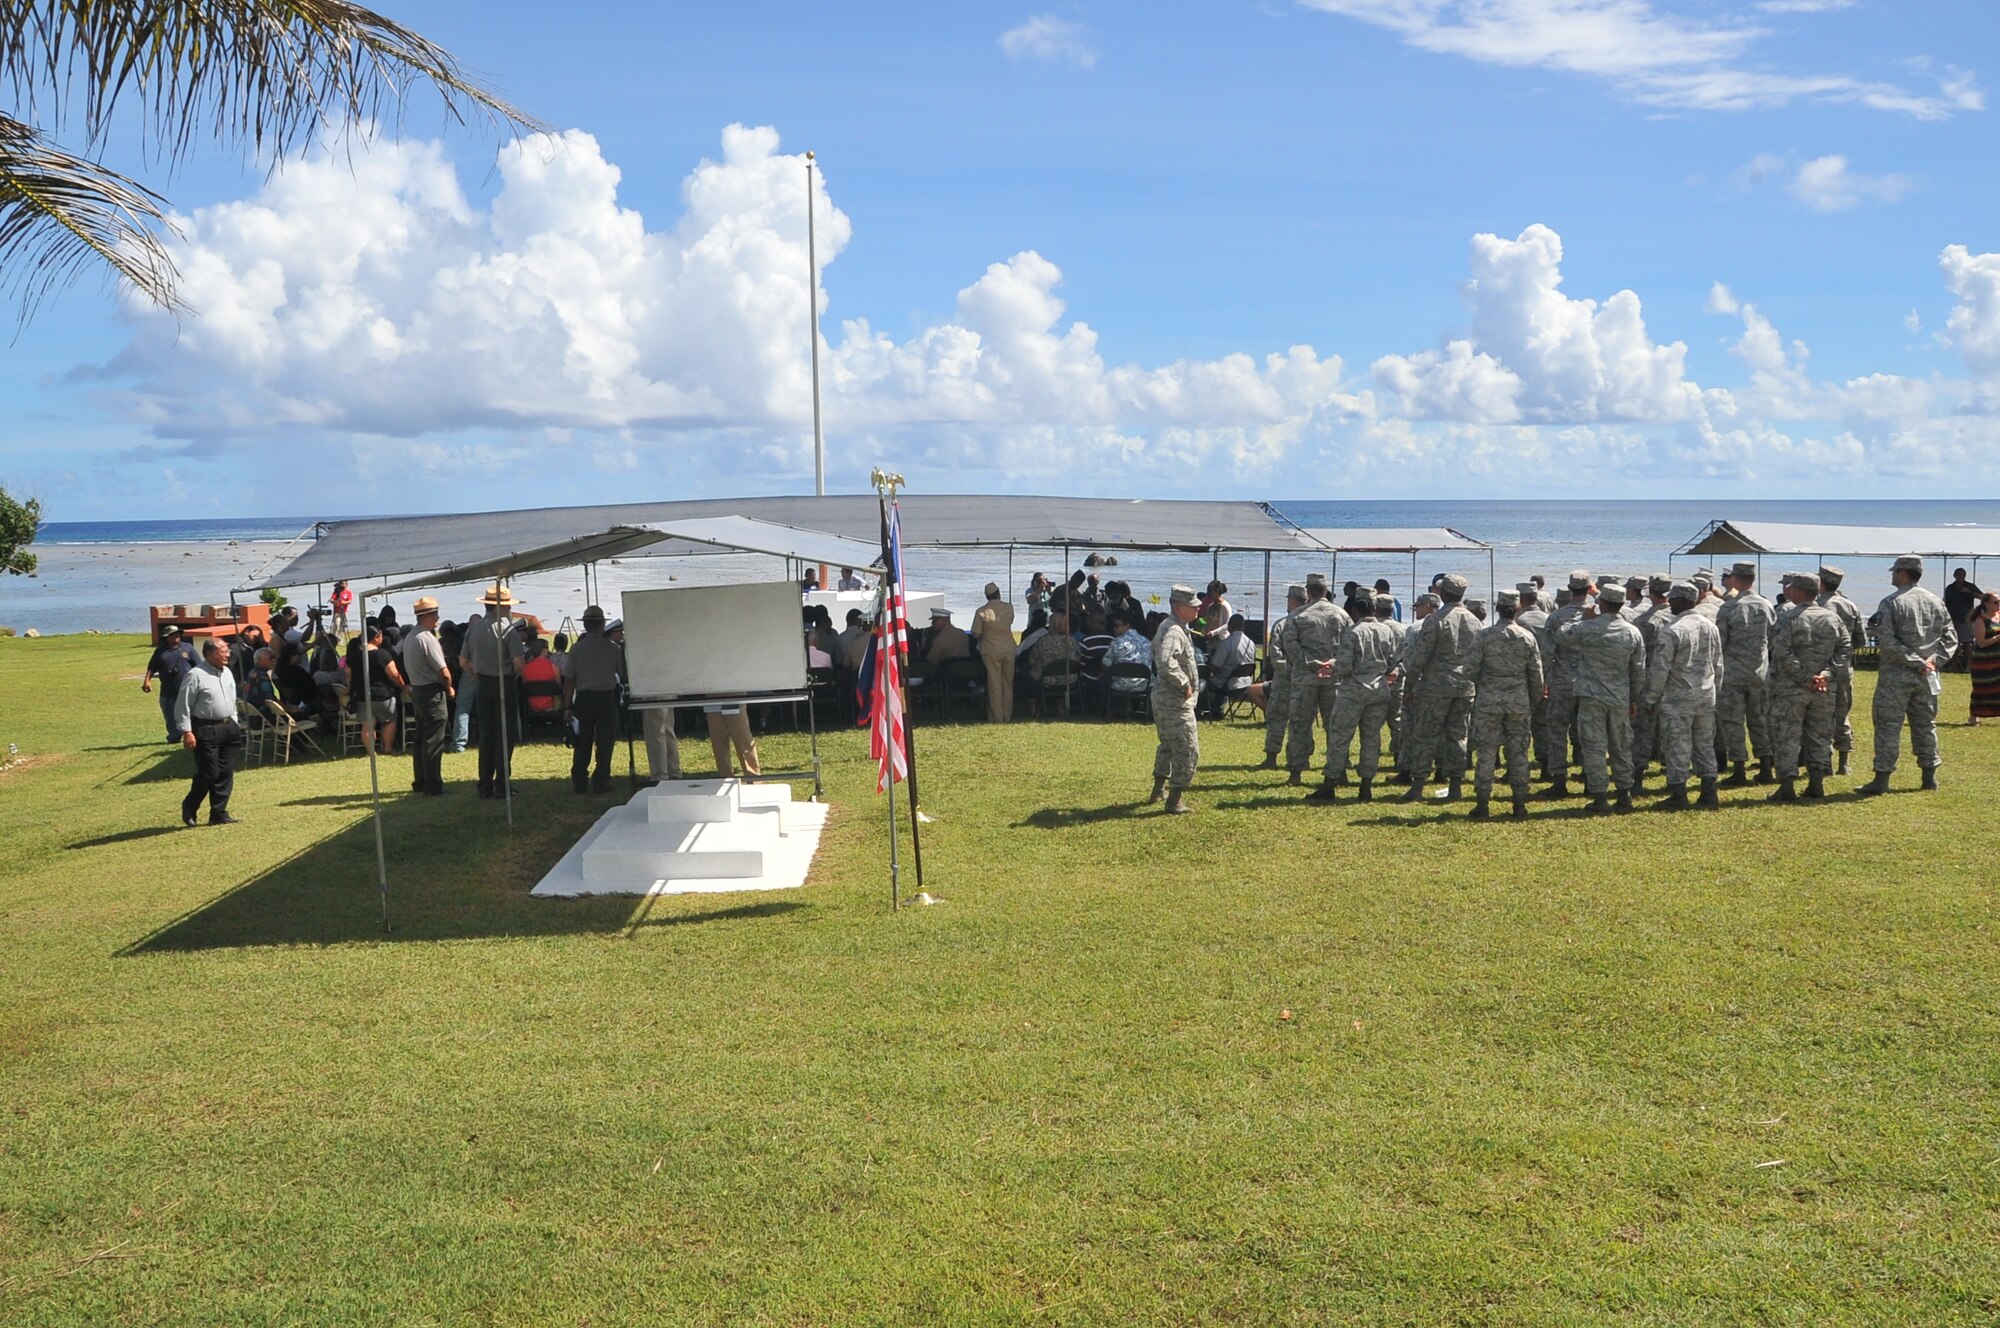 ASAN, Guam -- U.S. Air Force Airmen wait with local citizens for the arrival of Jonas Blas, the mayor of Asan, prior to the start of a ceremony July 18, 2013, paying tribute to the sacrifices made during the 1944 liberation of Guam. The ceremony was one of several held island-wide to commemorate events that occurred during the liberation 69 years ago. (U.S. Air Force photo by Airman 1st Class Adarius Petty/Released)